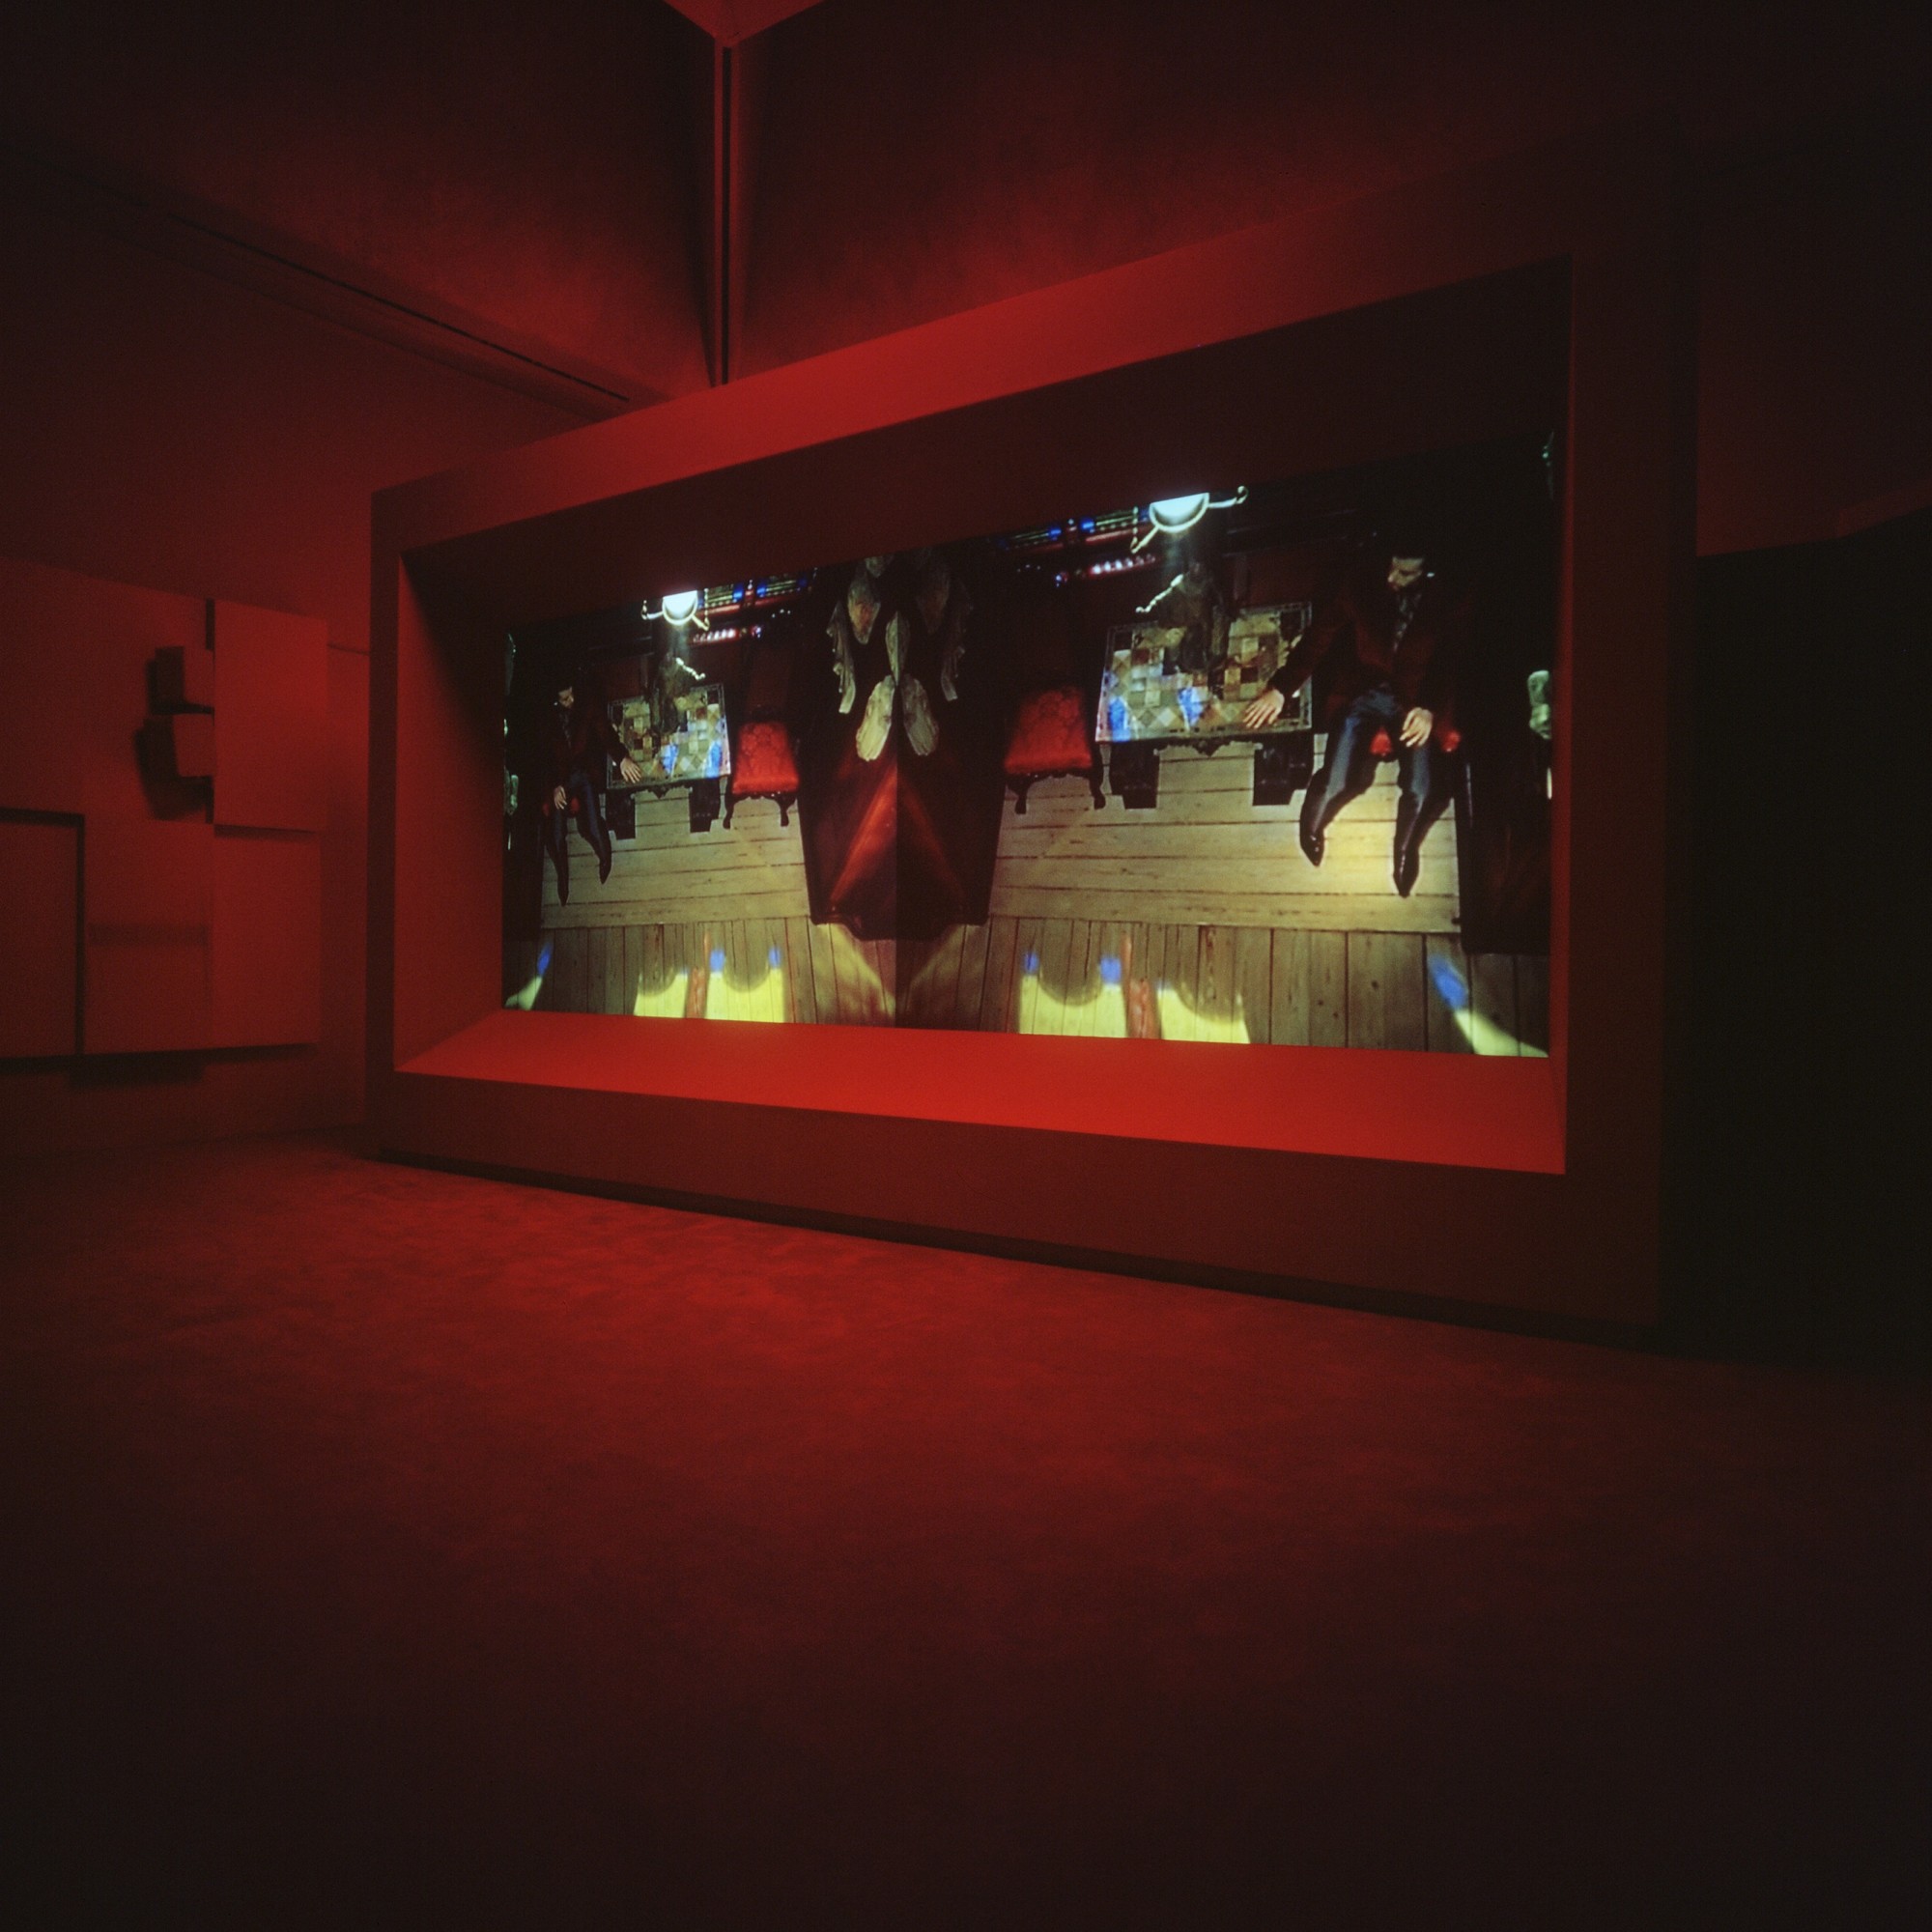 Turner Prize 2001. Tate Britain, London  7', double-screen projection, 16mm film transferred to digital, colour, sound